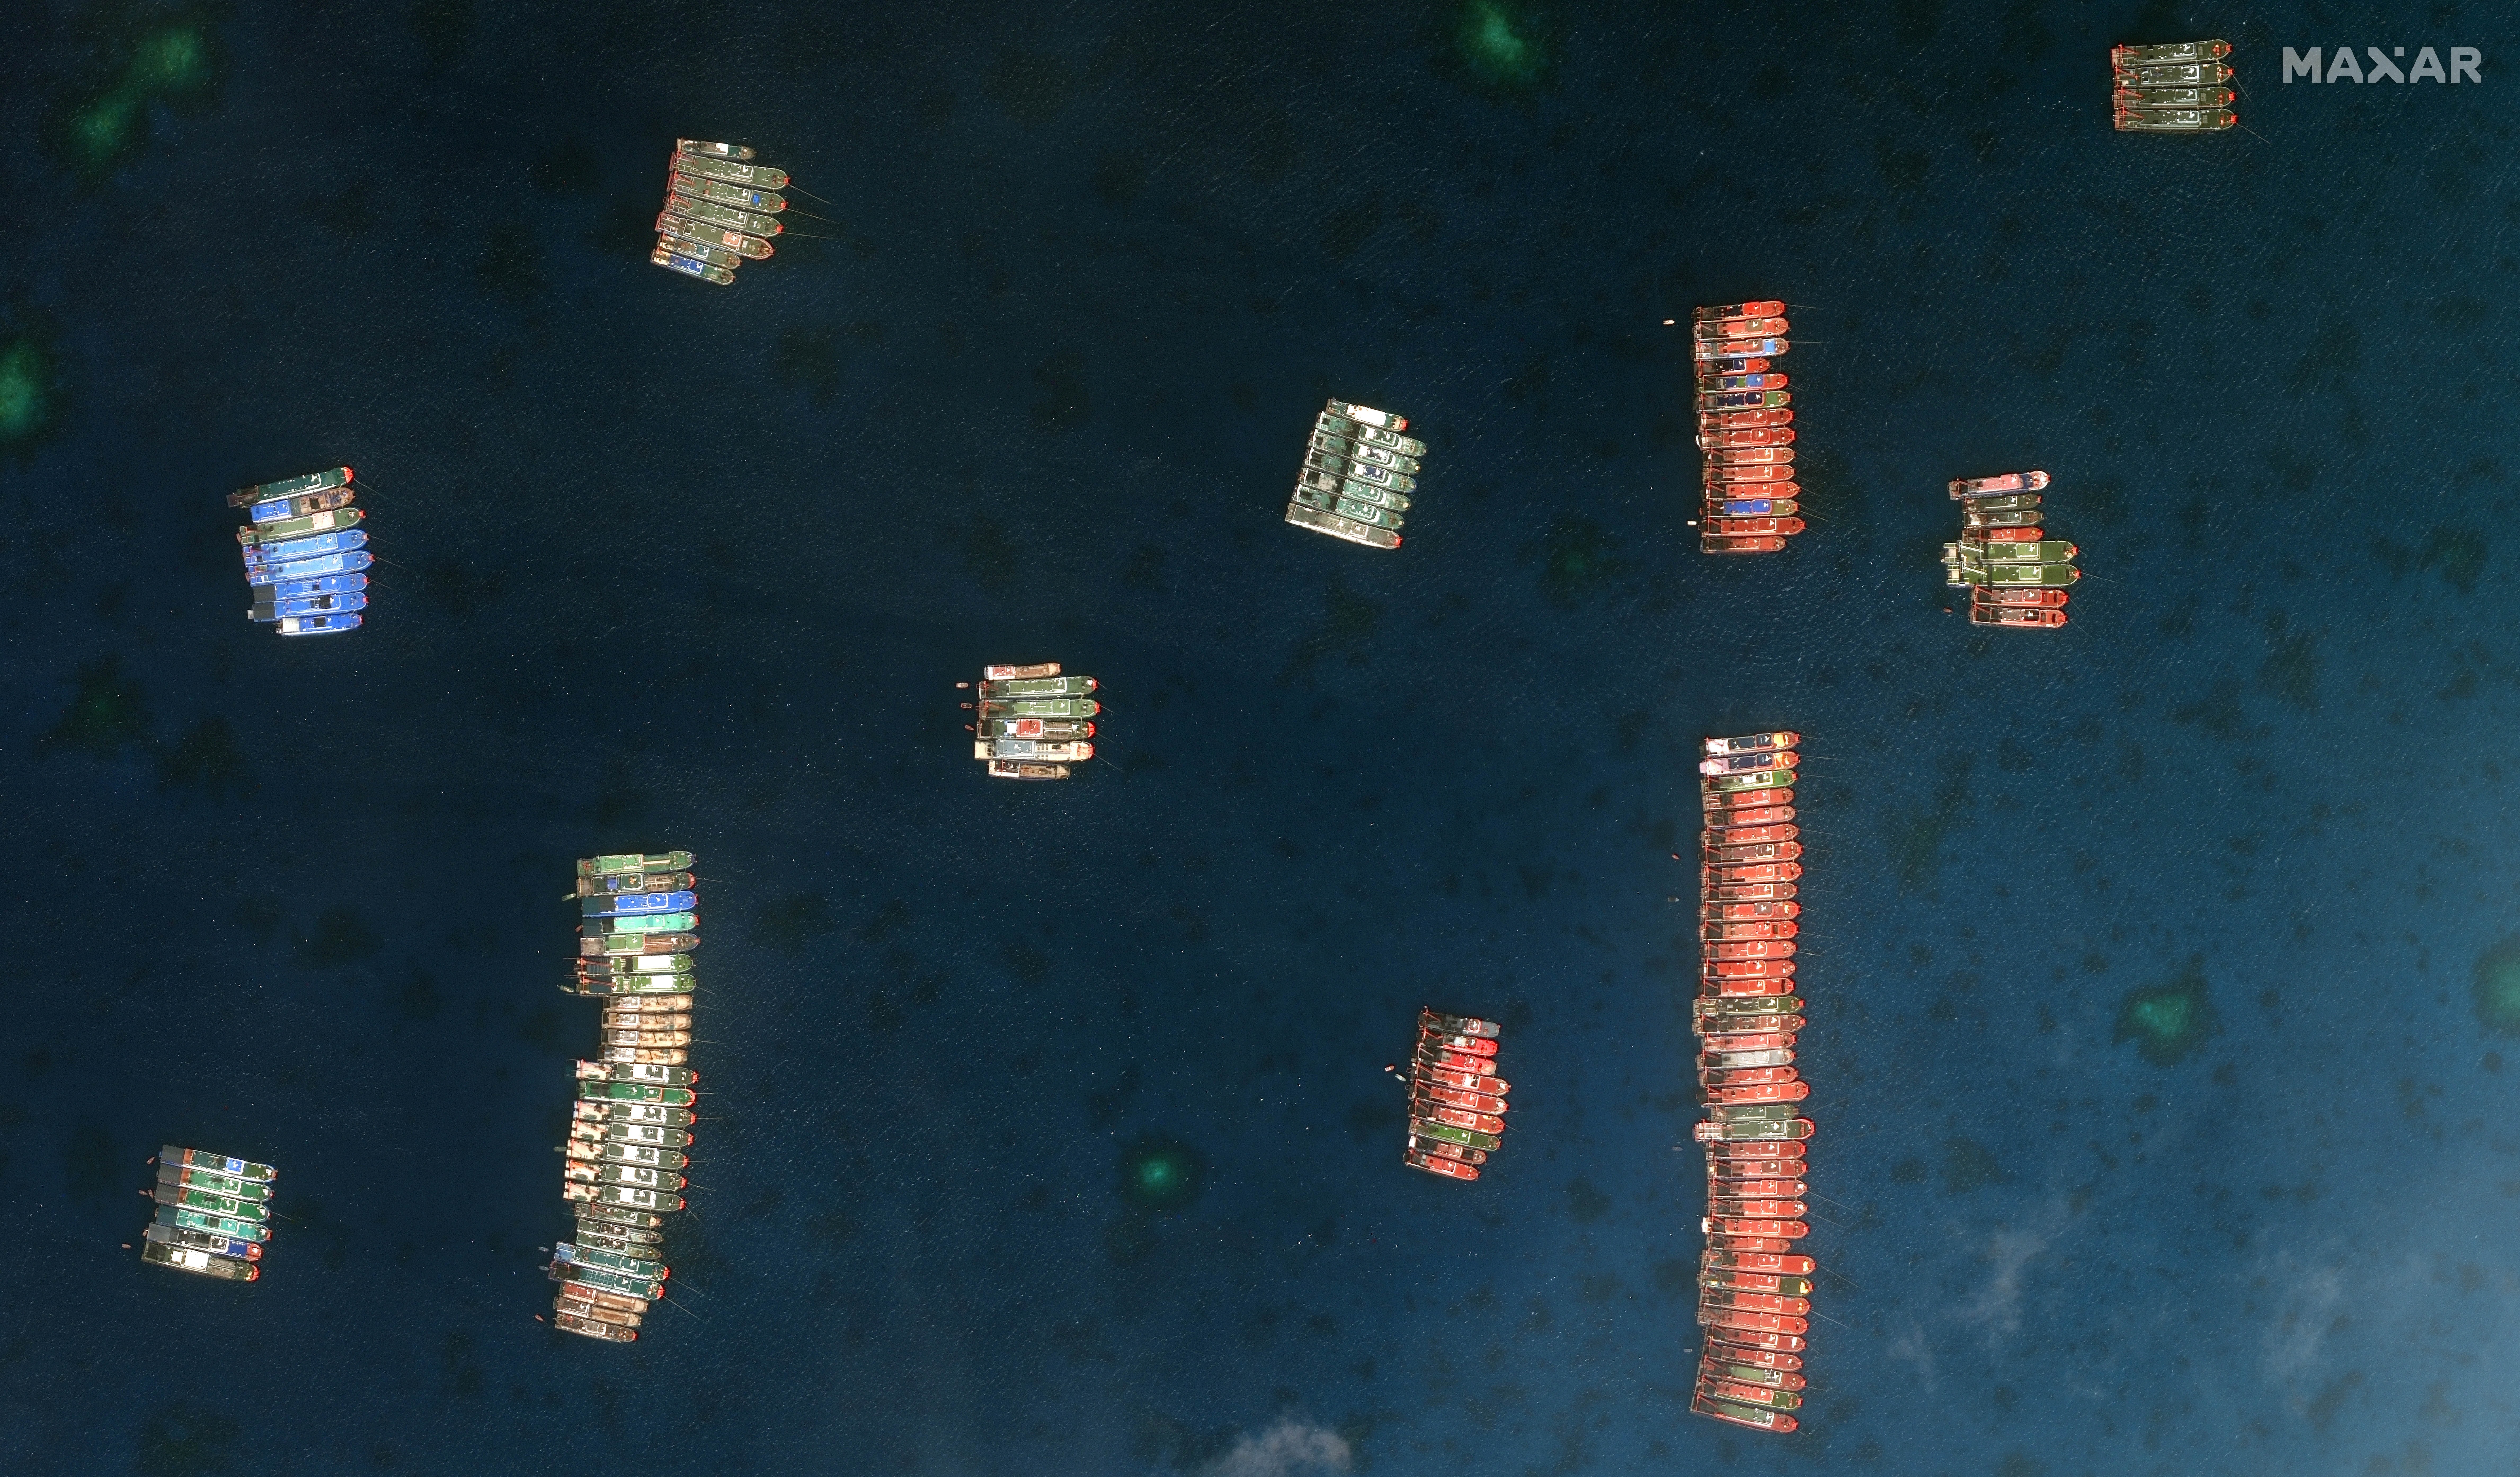 Closer view of one set of fishing vessels at Whitsun Reef, which Manila calls the Julian Felipe Reef, in this Maxar handout satellite image